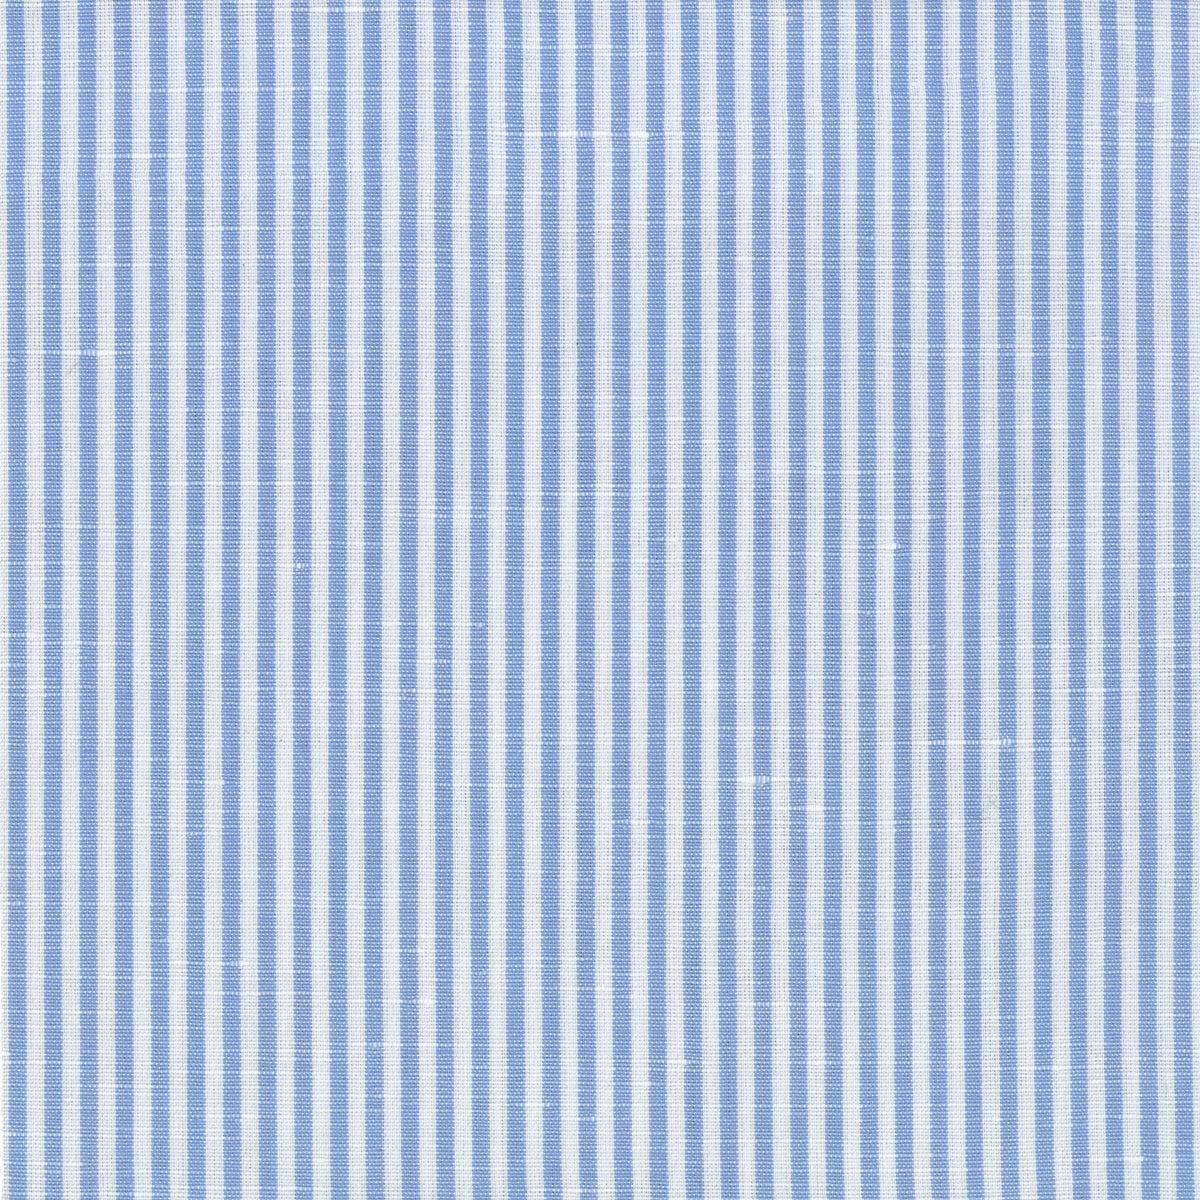 An image uploaded by bruce on May 13, 2024. May present: pattern, azure, blue, textile, plaid.